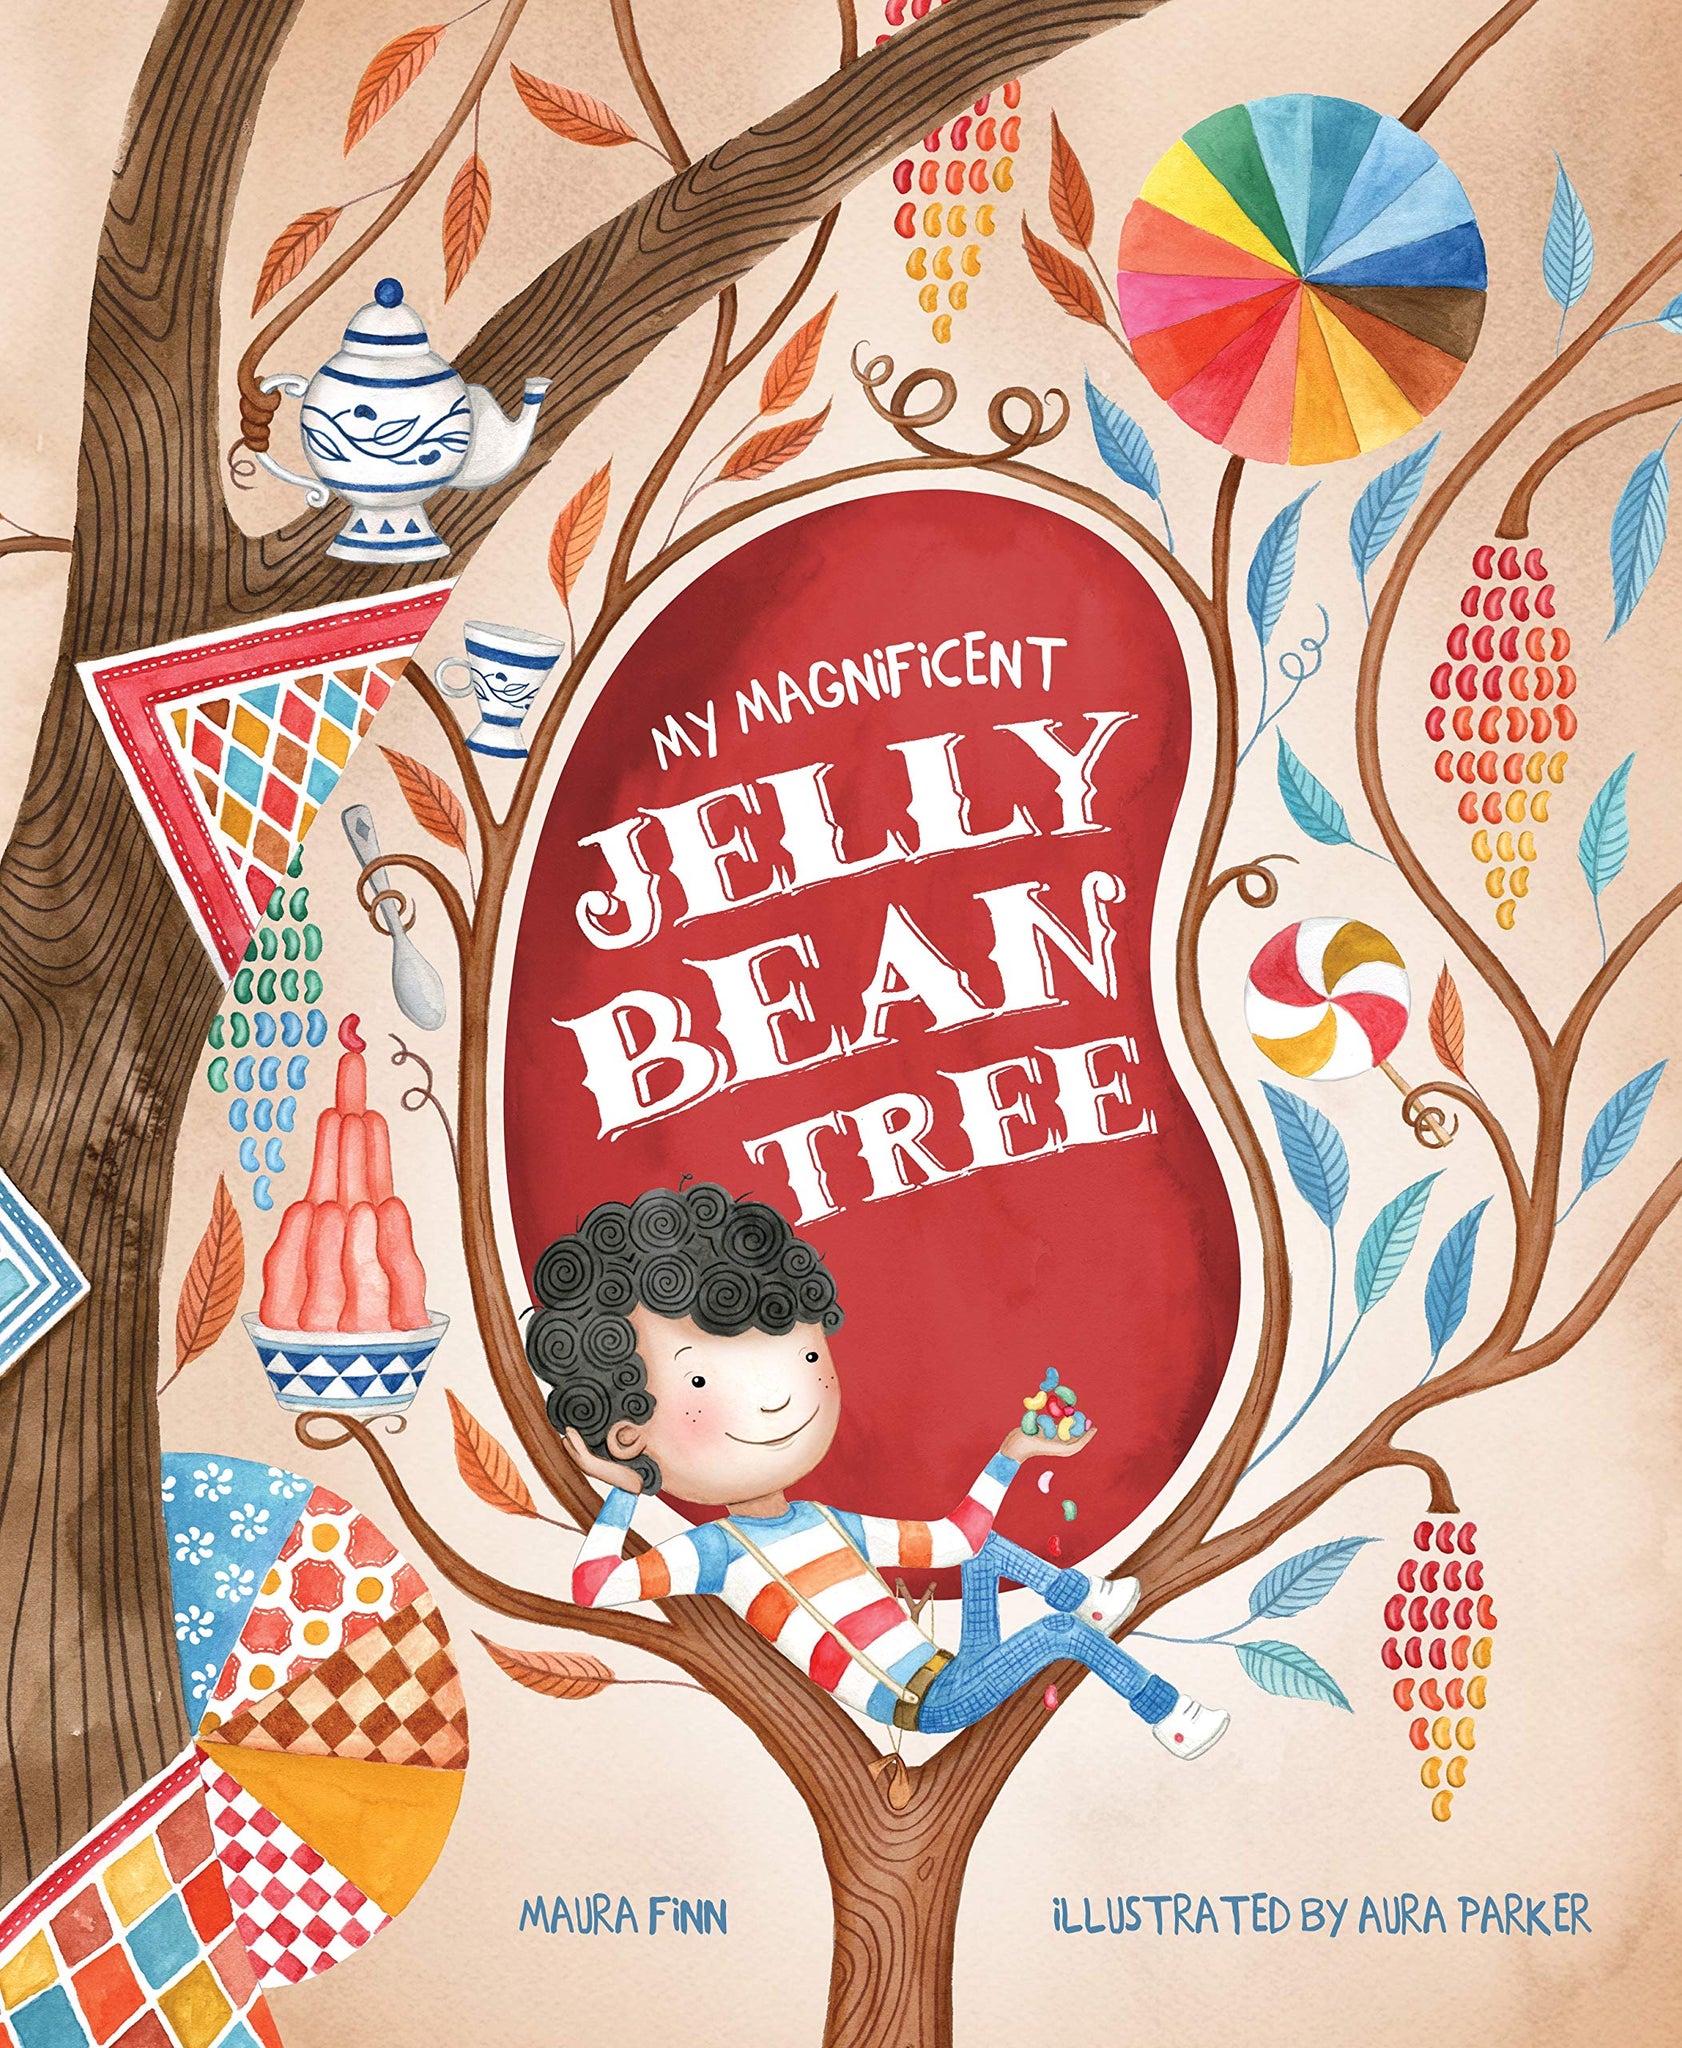 My Magnificent Jelly Bean Tree - Paperback